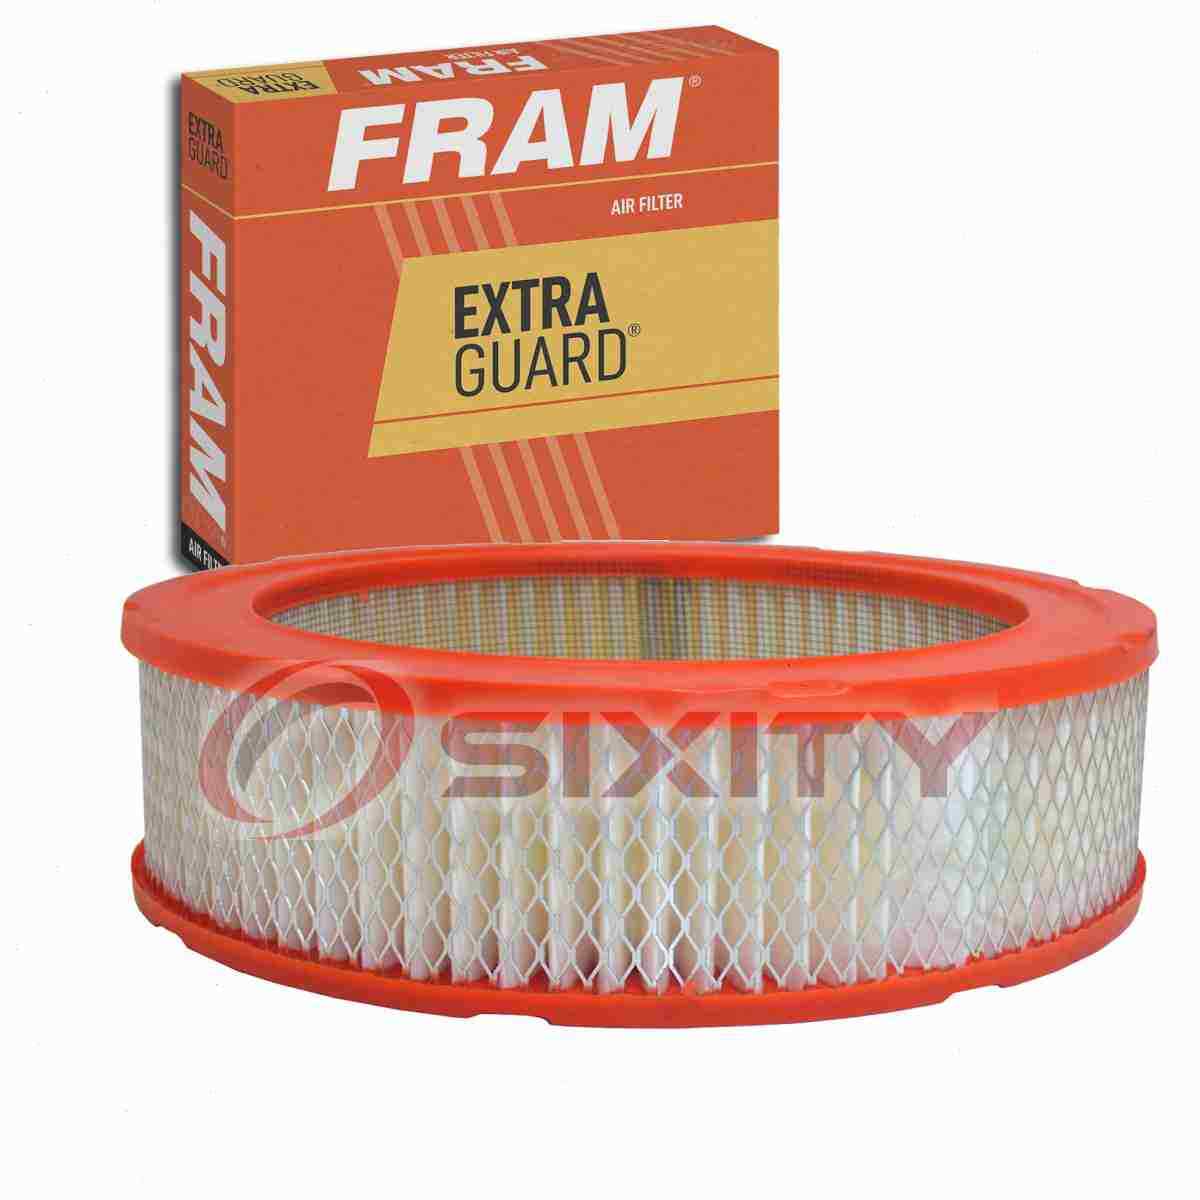 FRAM Extra Guard Air Filter for 1965-1967 Plymouth Belvedere II Intake Inlet ts